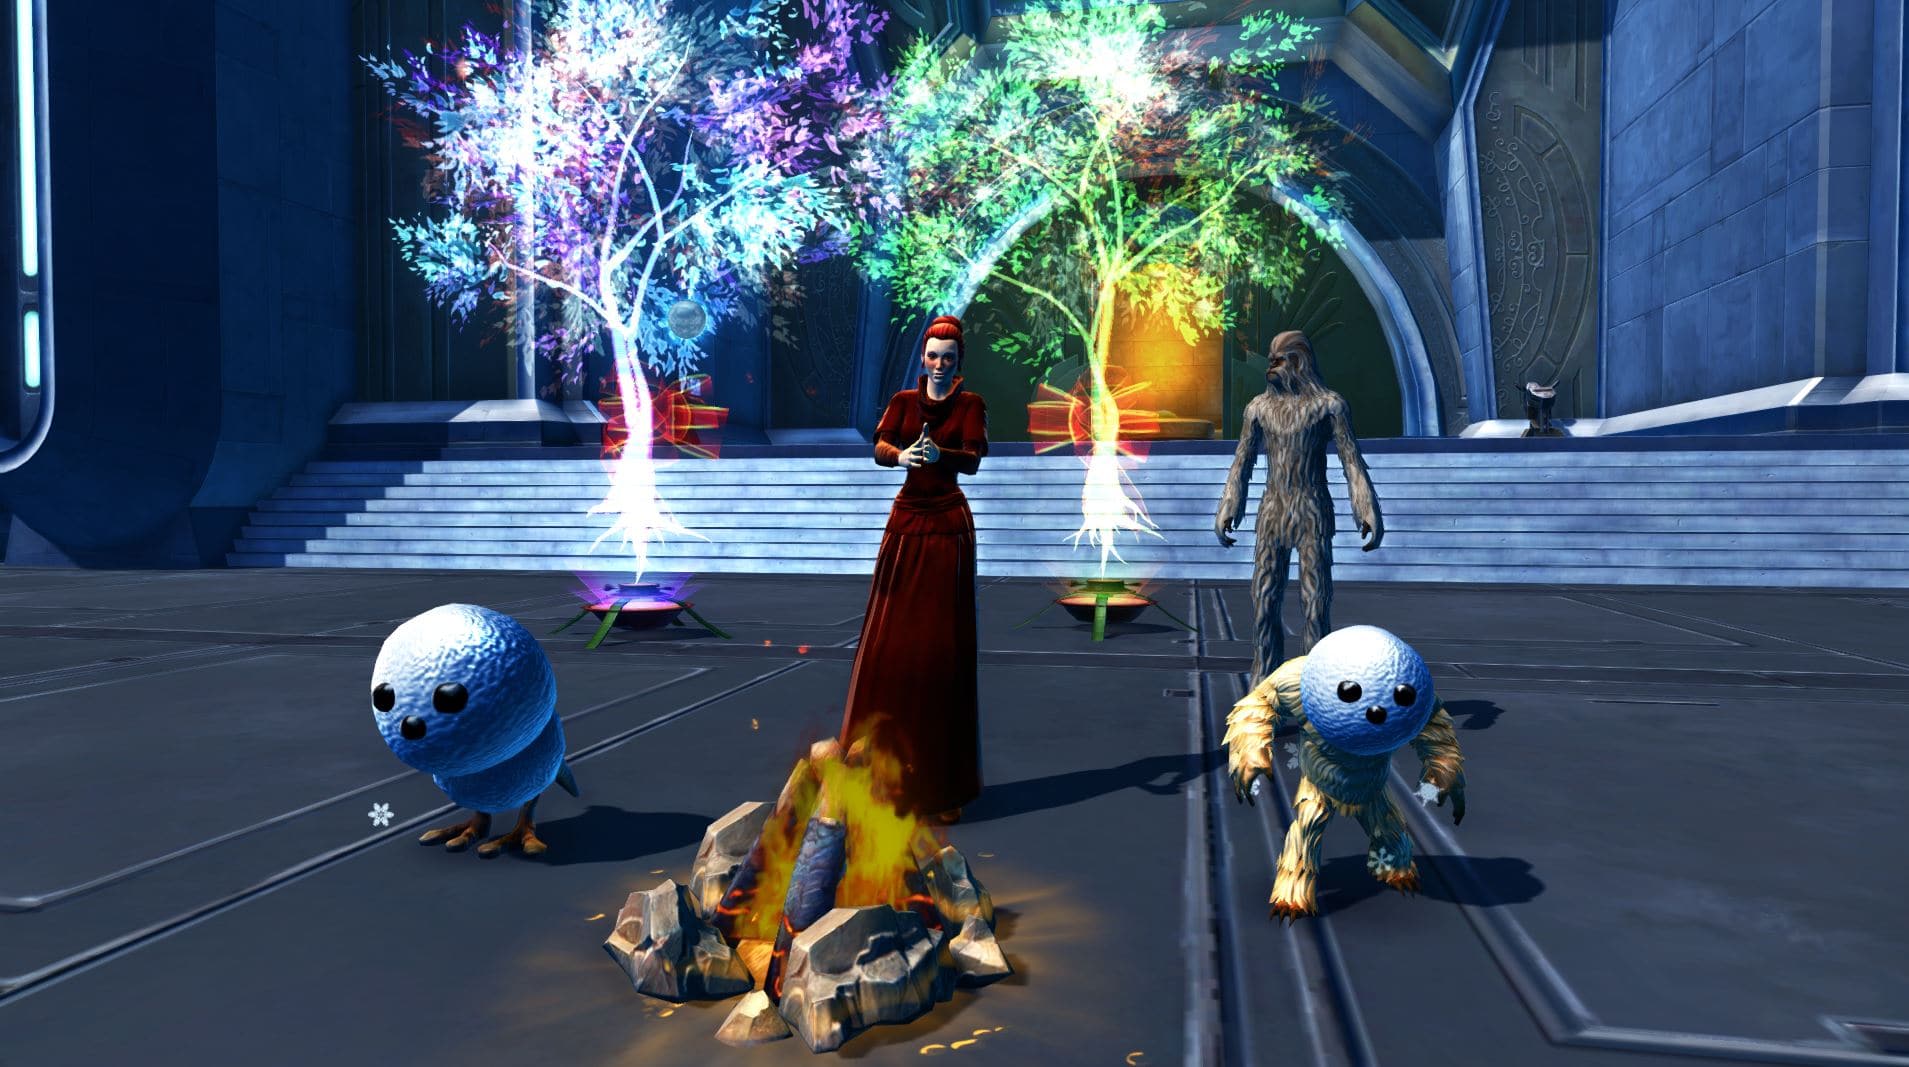 SWTOR News – December 2020 In-Game Events and Conquest Time Change